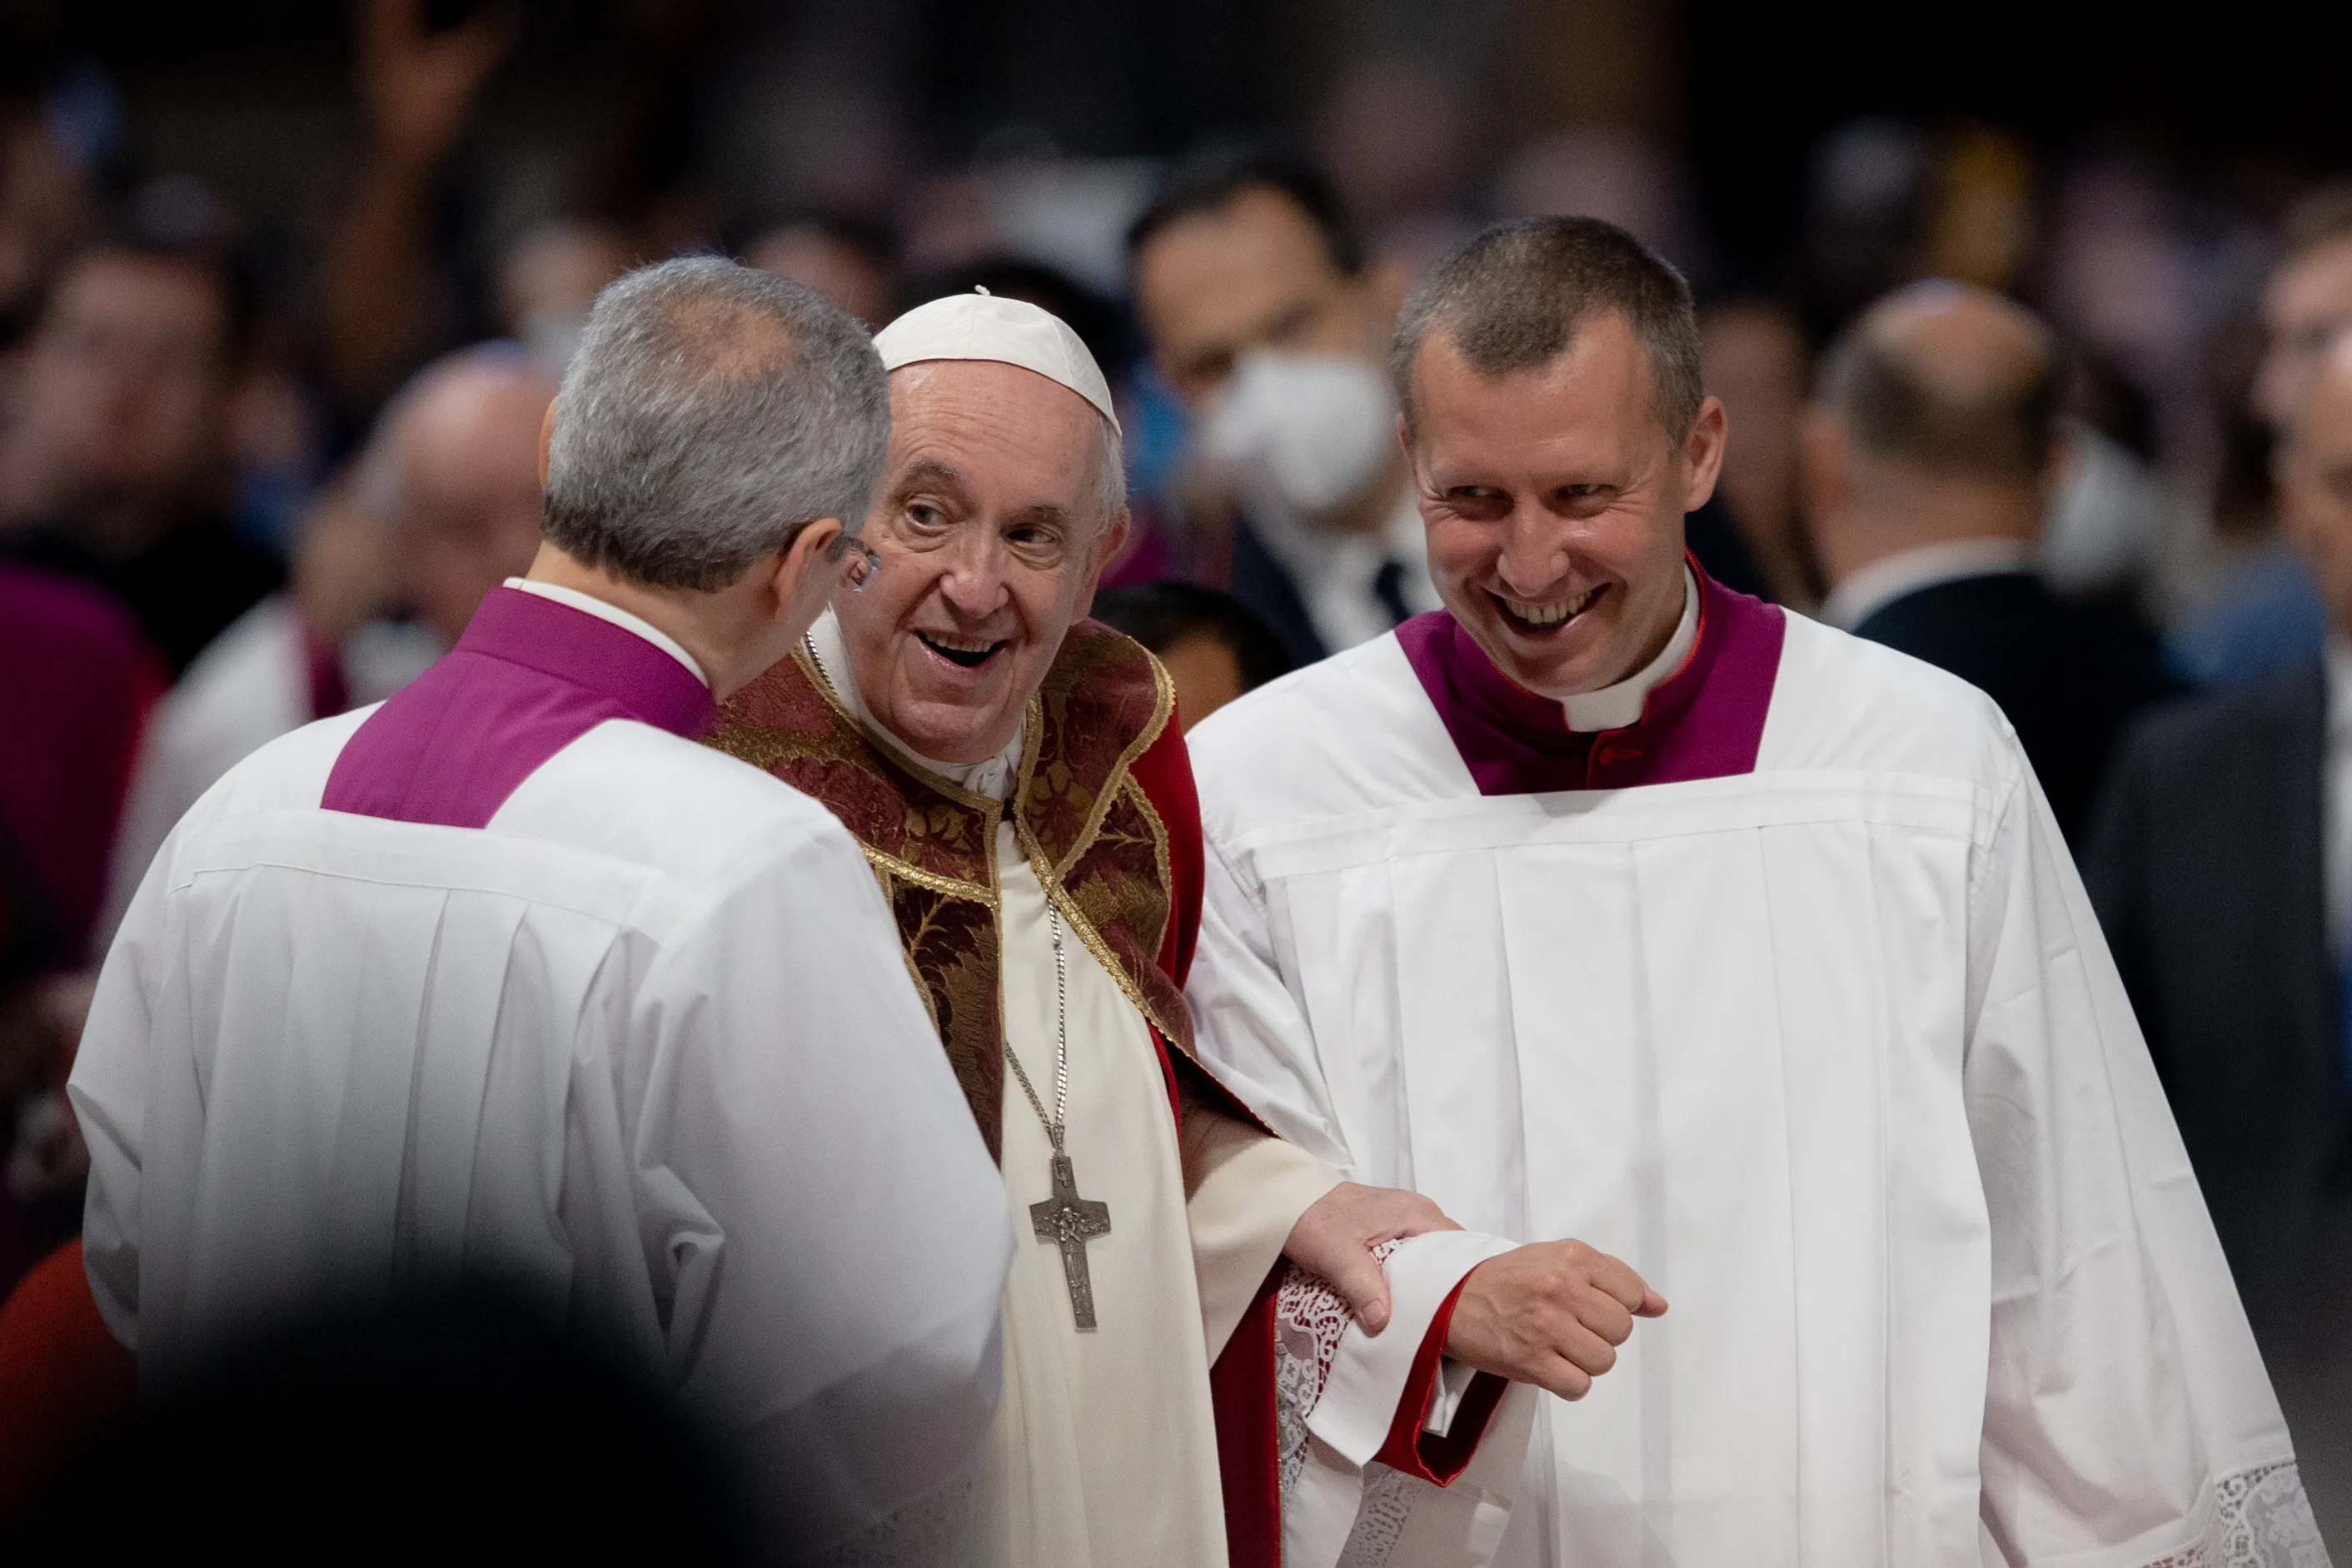 Pope Francis participated in the Mass for the Solemnity of St. Peter and St. Paul, patron saints of Rome, in St. Peter's Basilica at the Vatican. He presided over the opening rites of the Mass and gave the homily on June 29, 2022. Daniel Ibañez/CNA